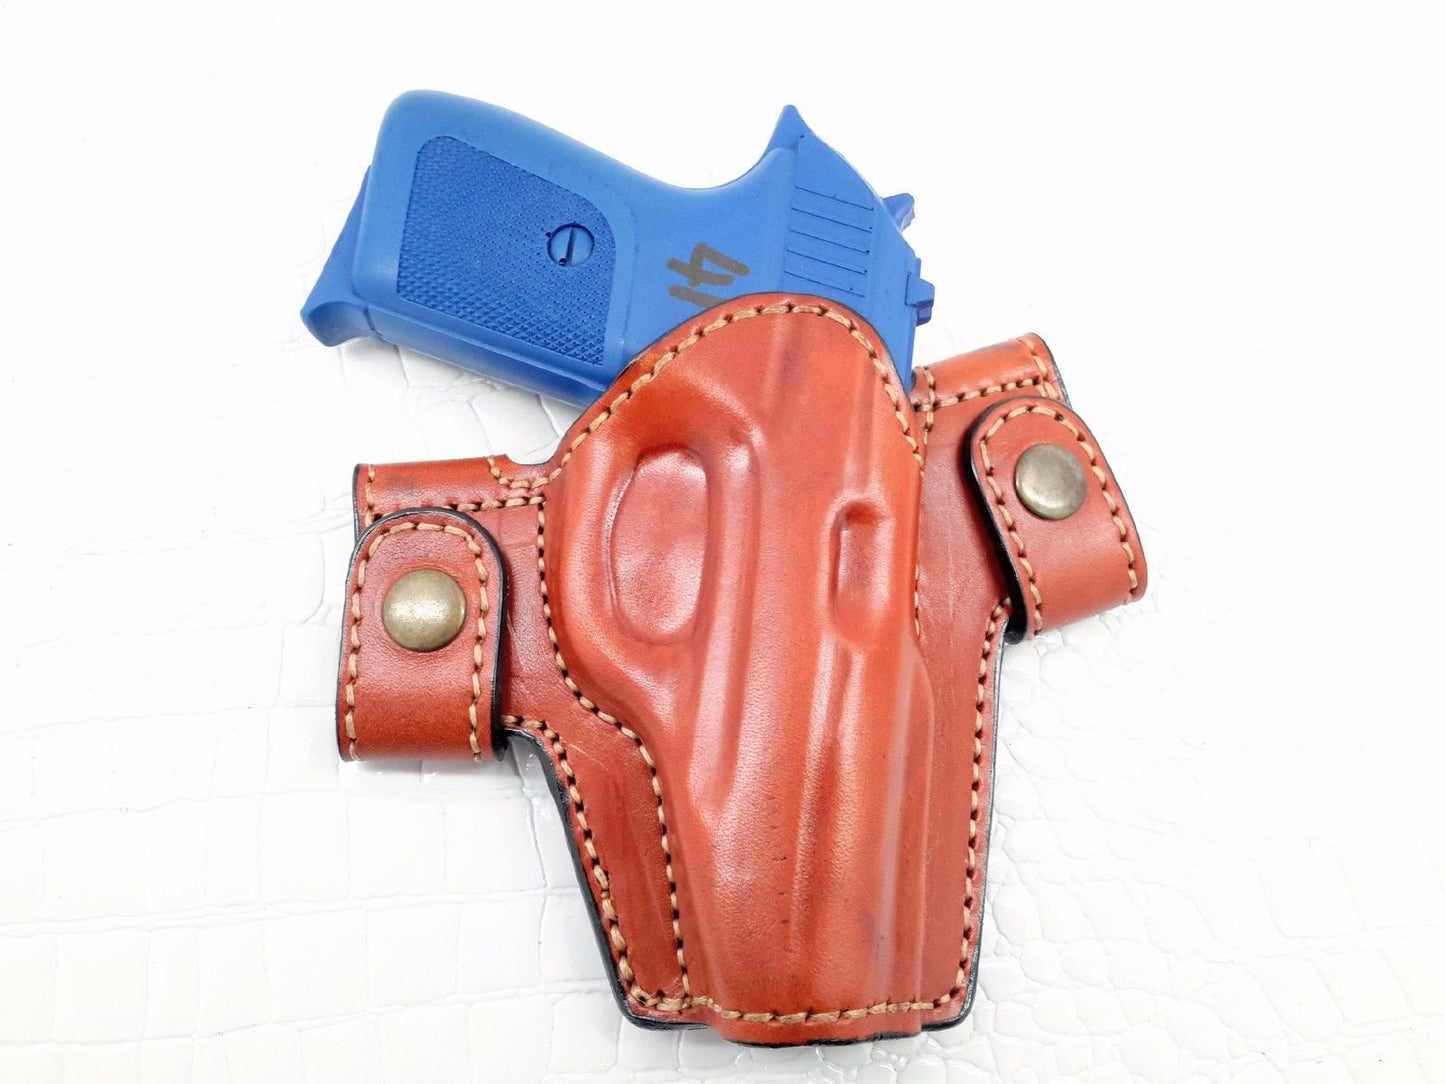 Snap-on Holster for SIG Sauer P230, MyHolster